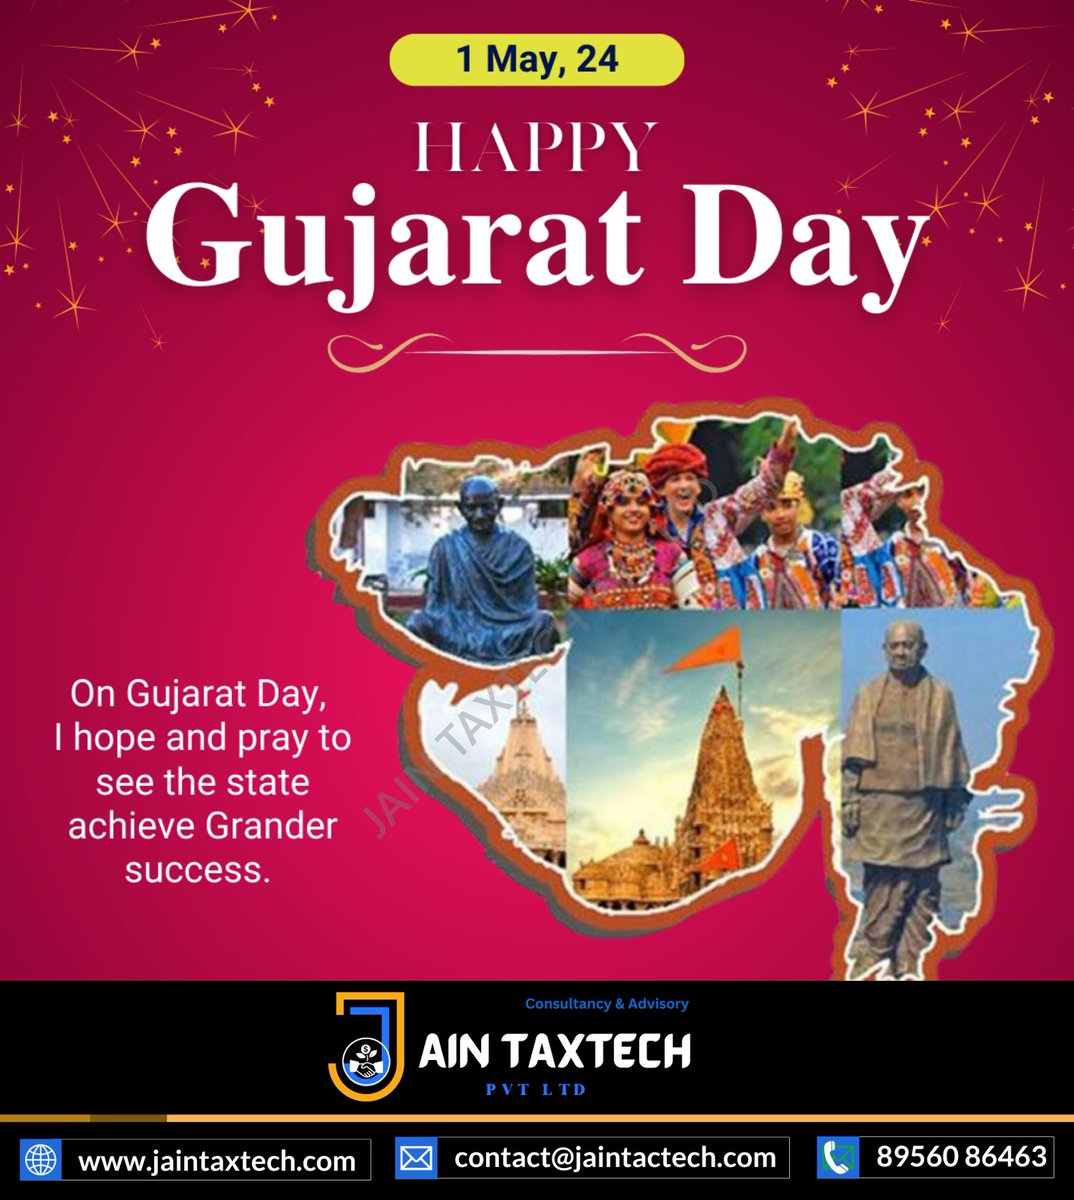 Greetings on Gujarat Day! 🎉 Celebrating the Vibrant Culture, Heritage, and Progress of Gujarat. Jain TaxTech Wishes Gujarat Prosperity and Success! 🌟🏞️ #GujaratDay #Celebrations #JainTaxTech #AccountingServices #FinancialConsulting #CAConsultancy